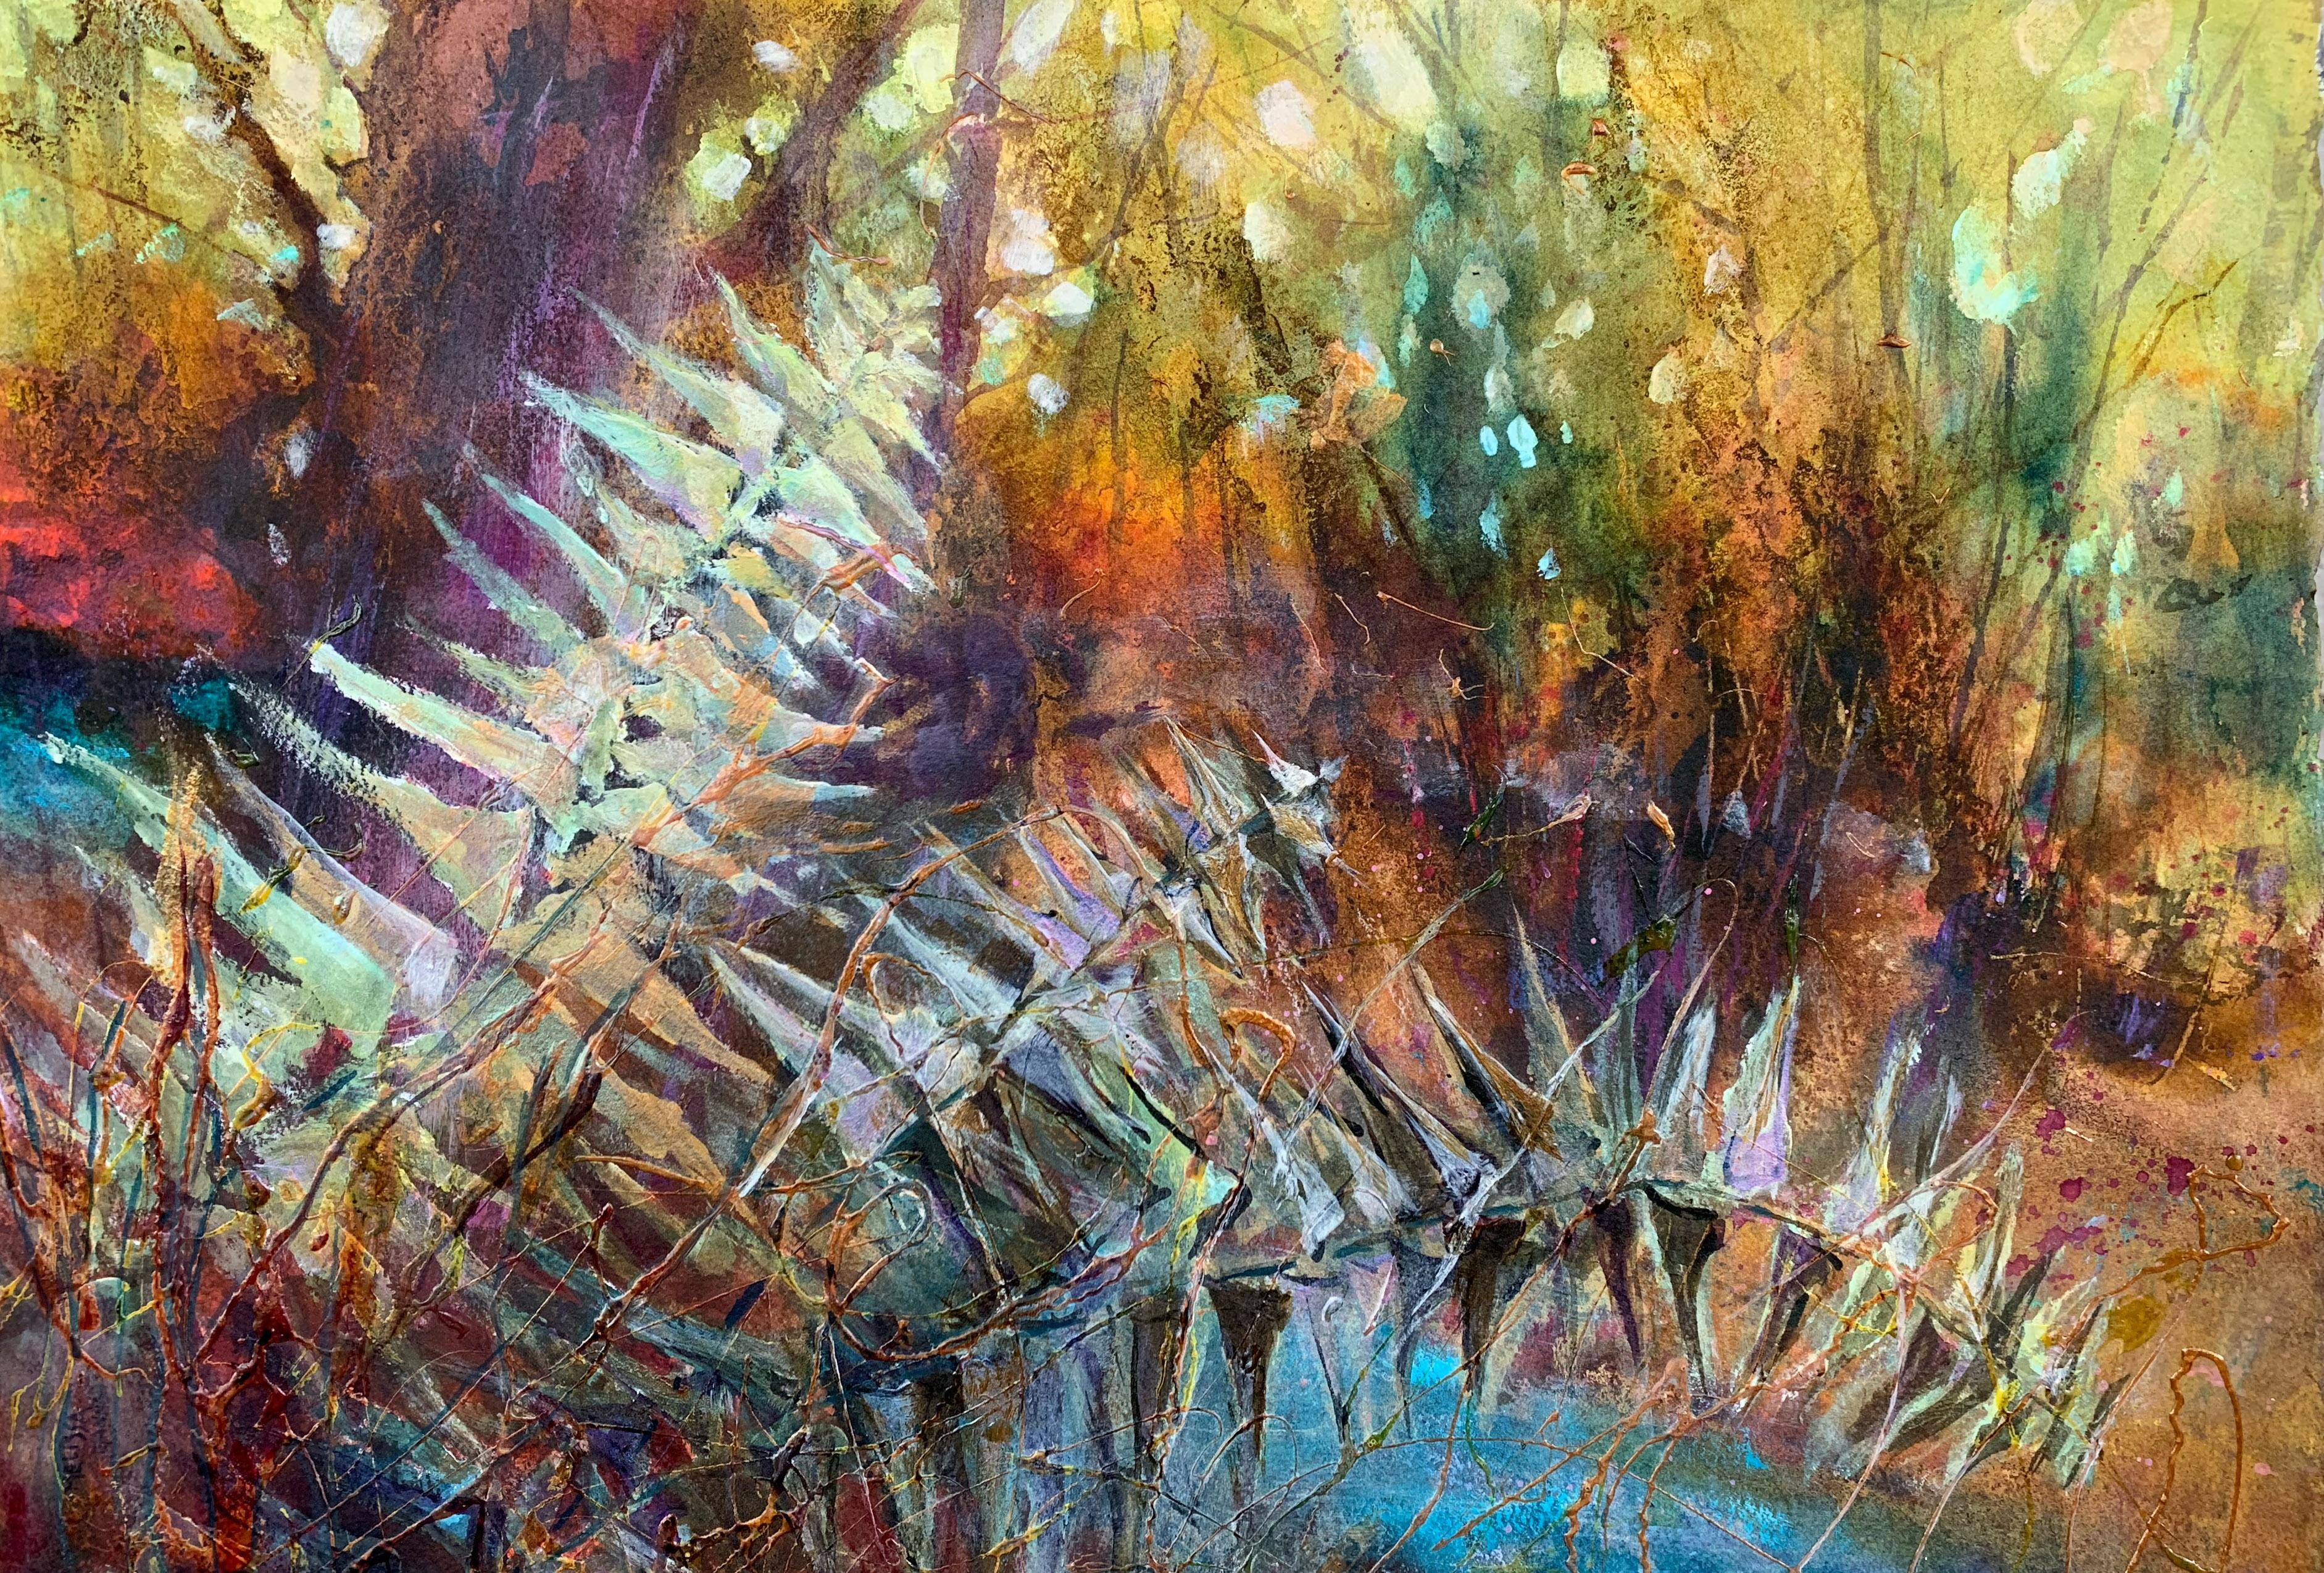 Jumble in the Woods, Original Painting - Mixed Media Art by Melissa Gannon